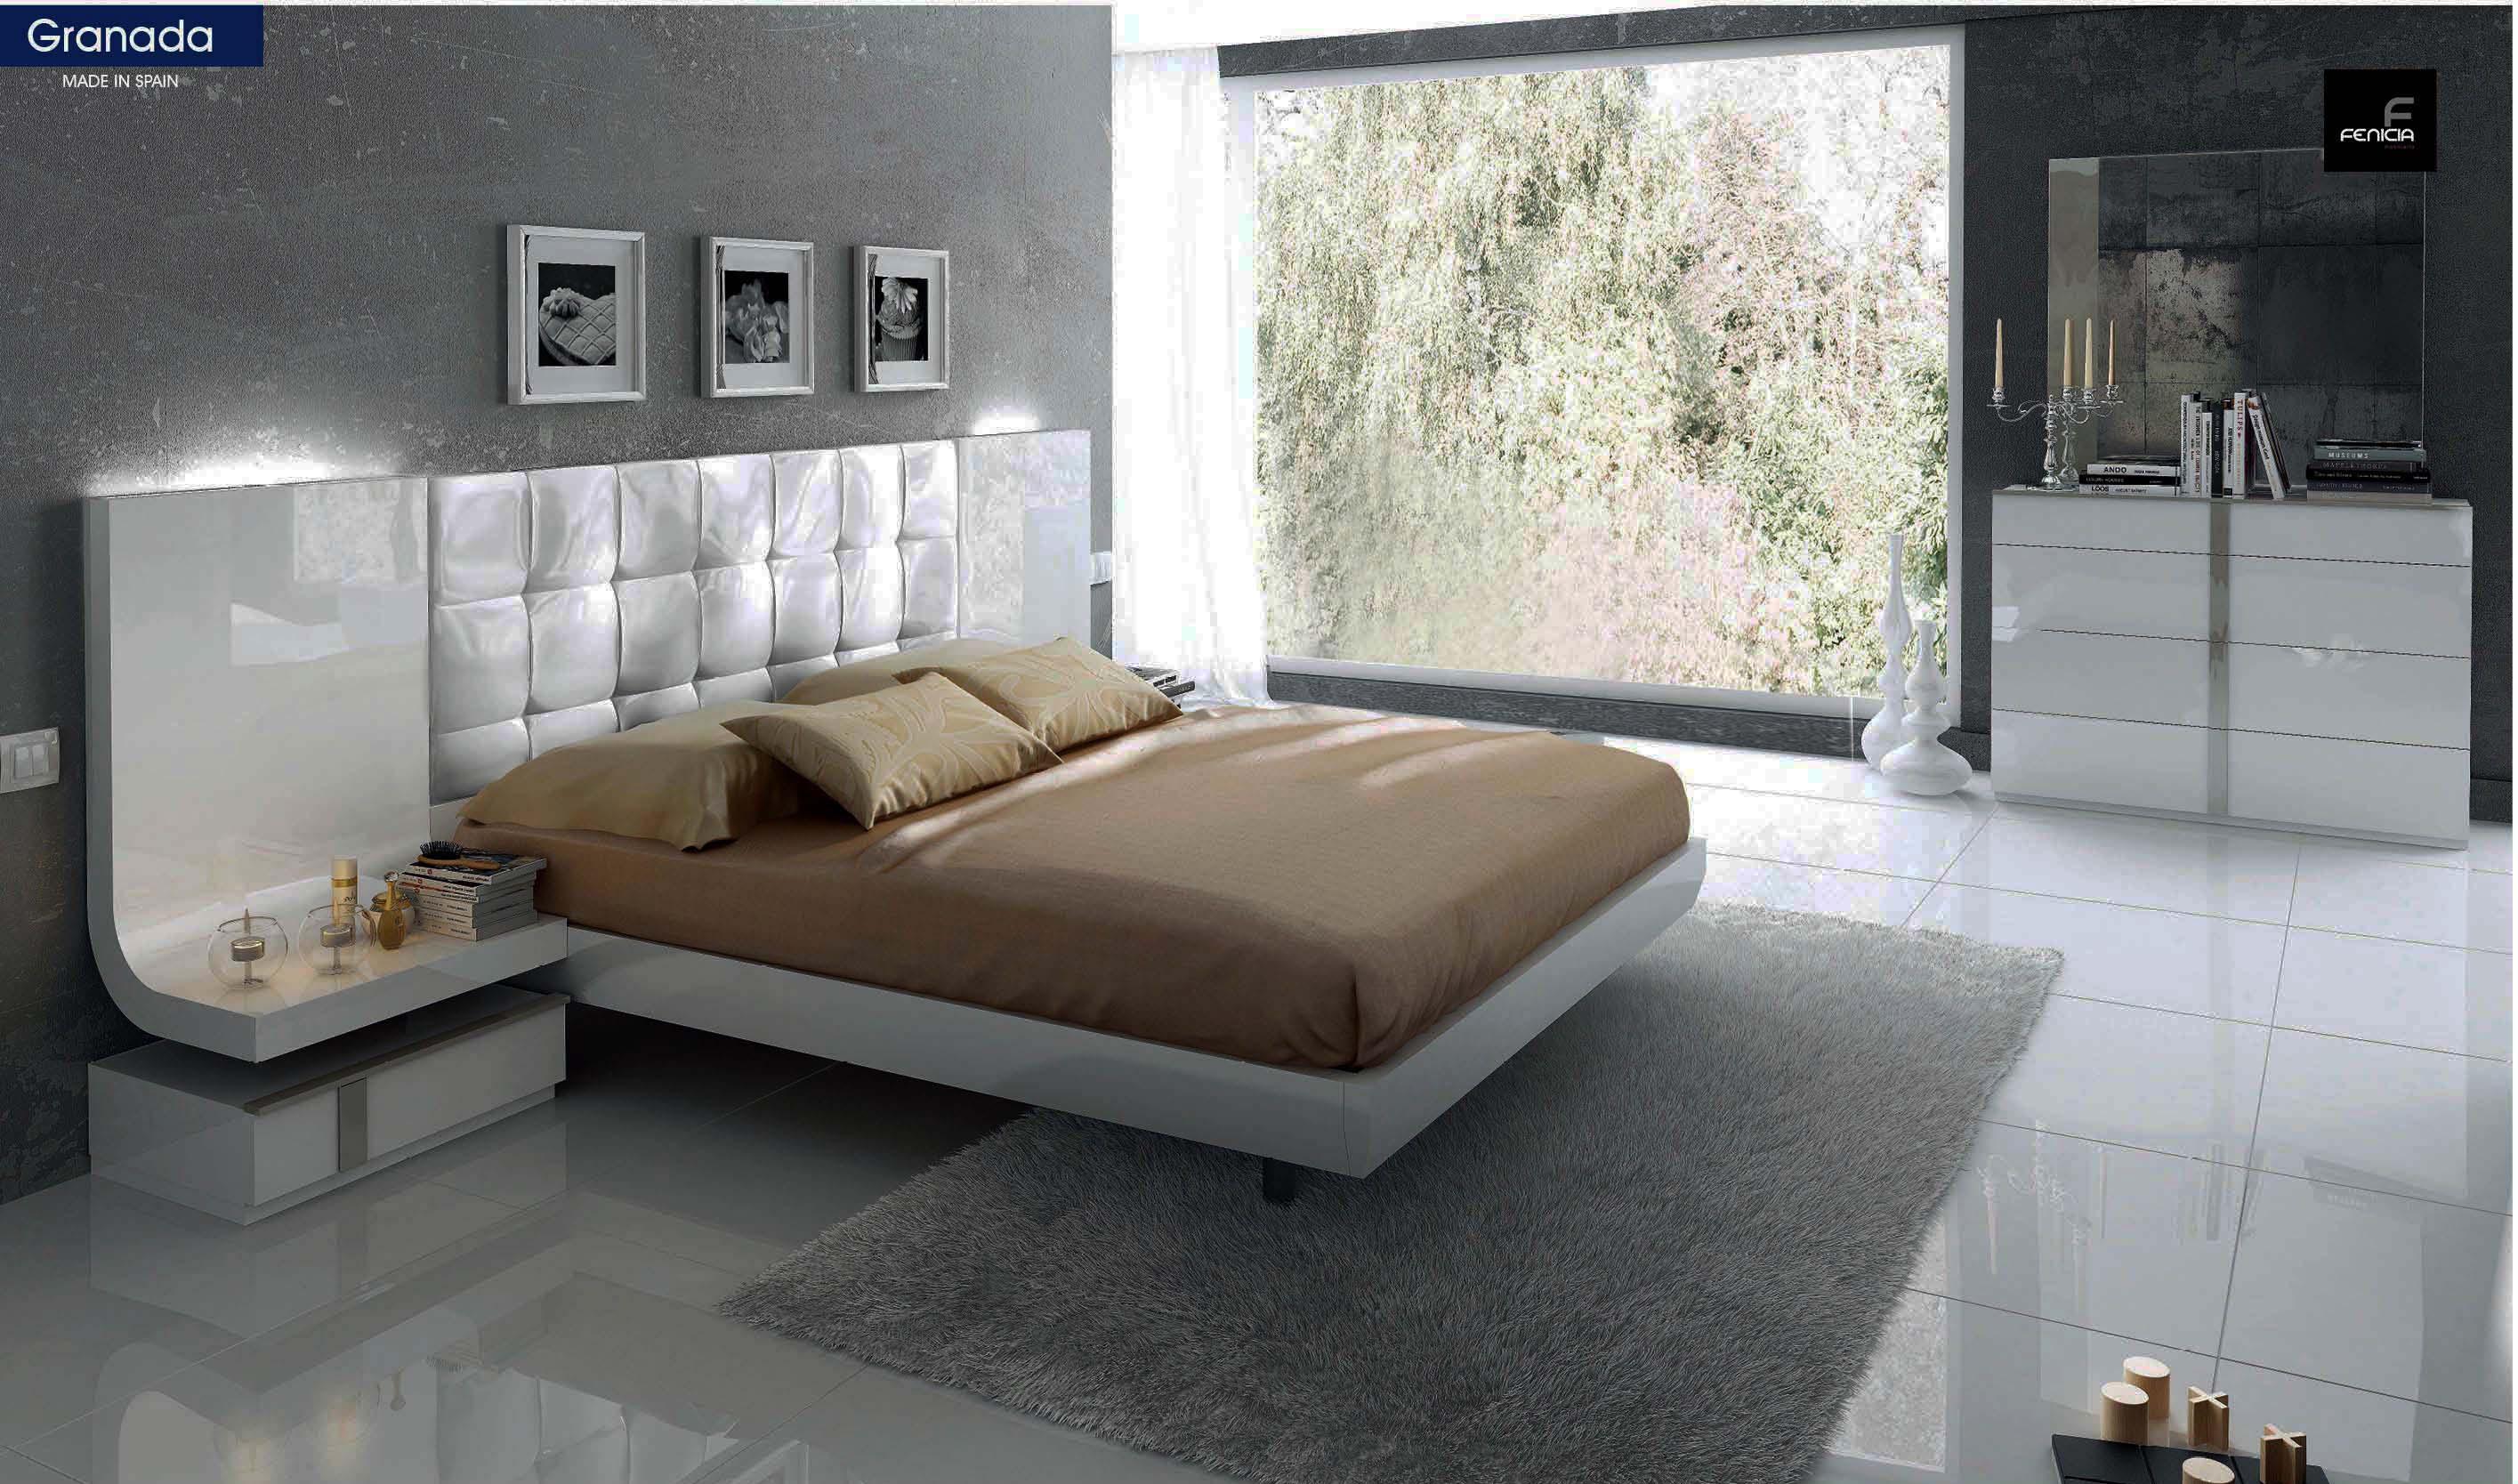 

    
Glossy White Queen Bedroom Set 5Pcs Contemporary Made in Spain ESF Granada
